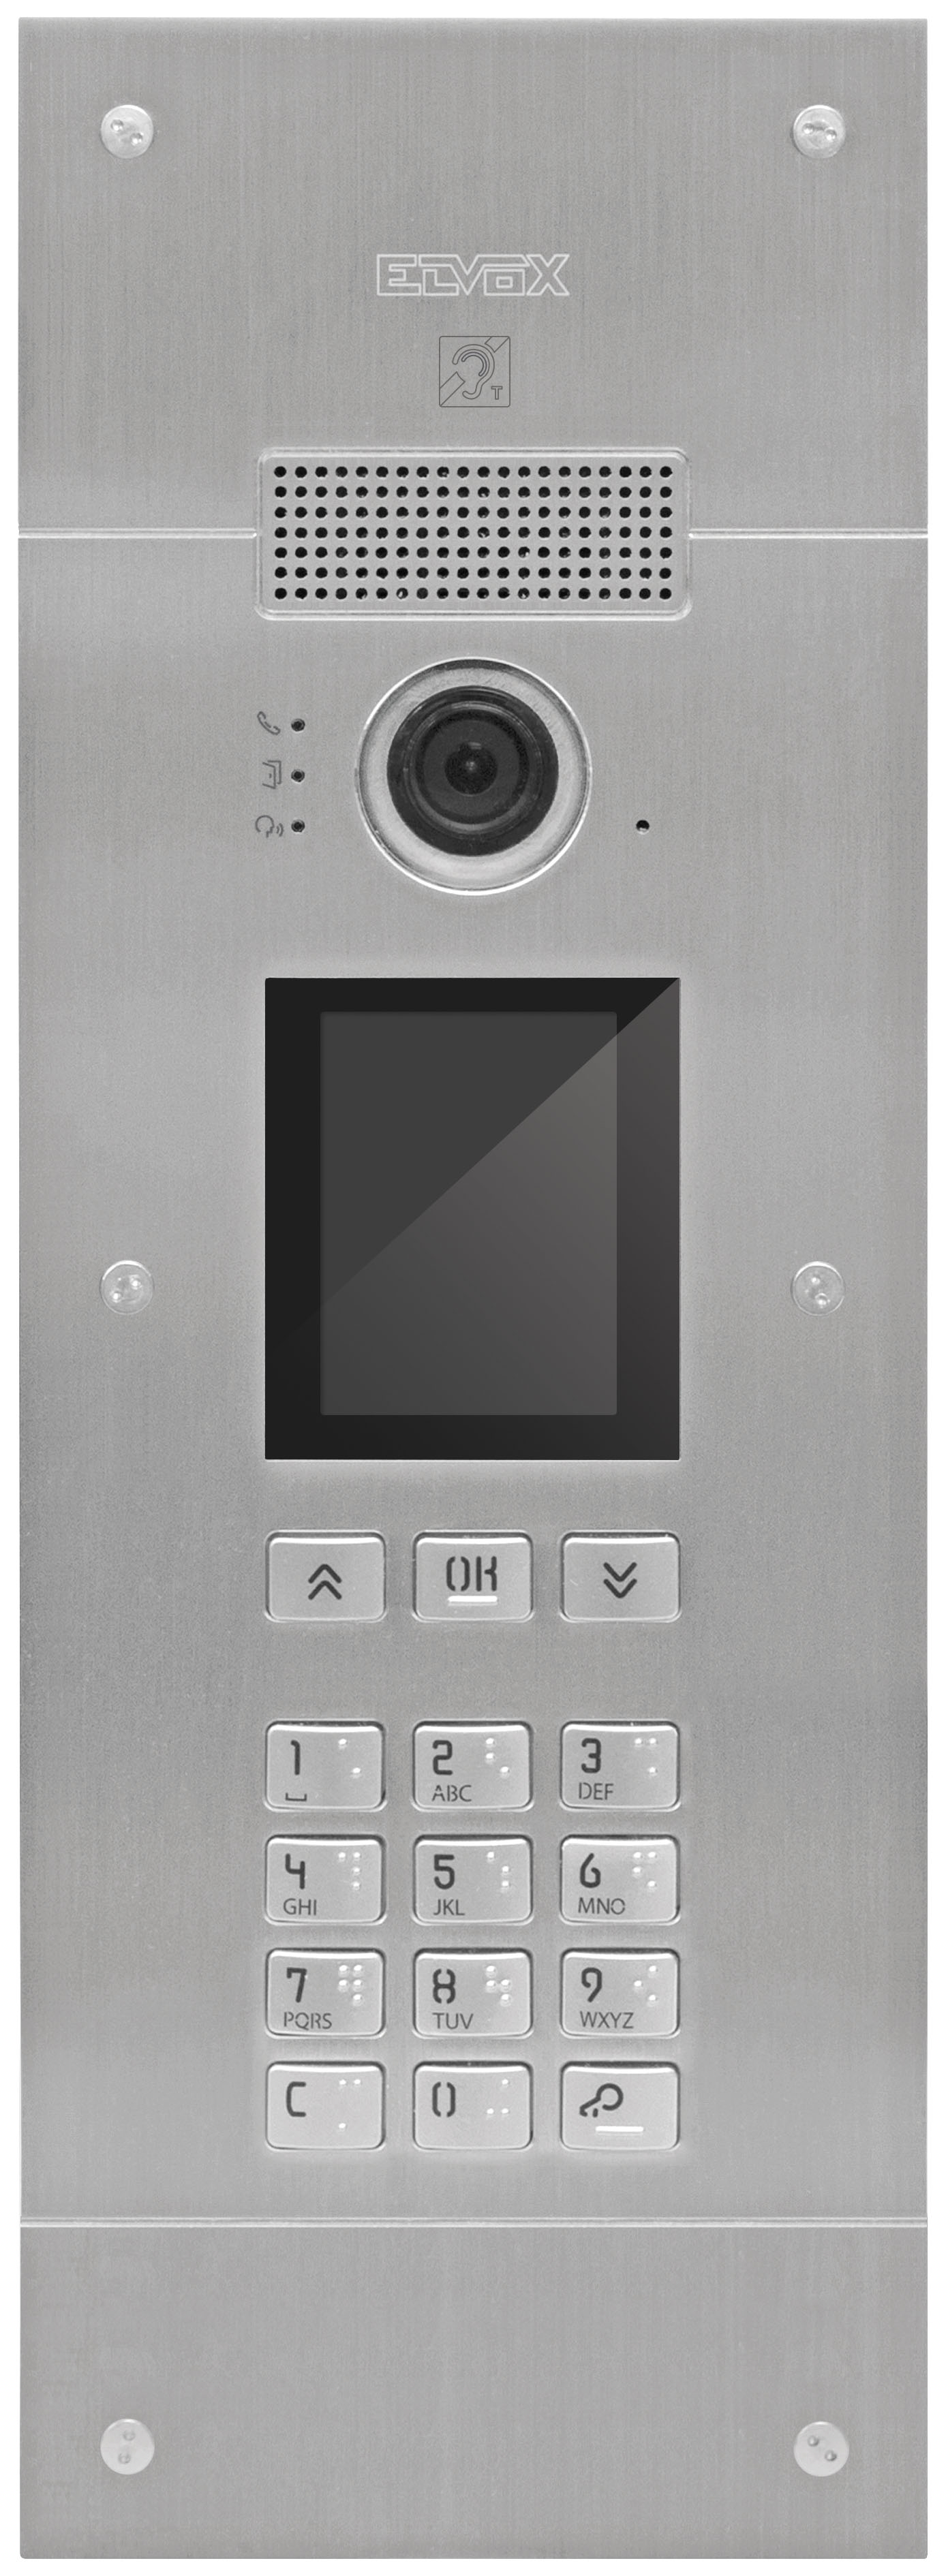 ELVOX PIXEL UP DUE FILI+ 2-WIRE INTERCOM KEYPAD & VIDEO DOOR STATION SILVER APARTMENT/COMMERCIAL 3.5 INCH DISPLAY MECHANICAL BUTTON 380TVL 104° STAINLESS STEEL POWER BY BUS CONTROLLER